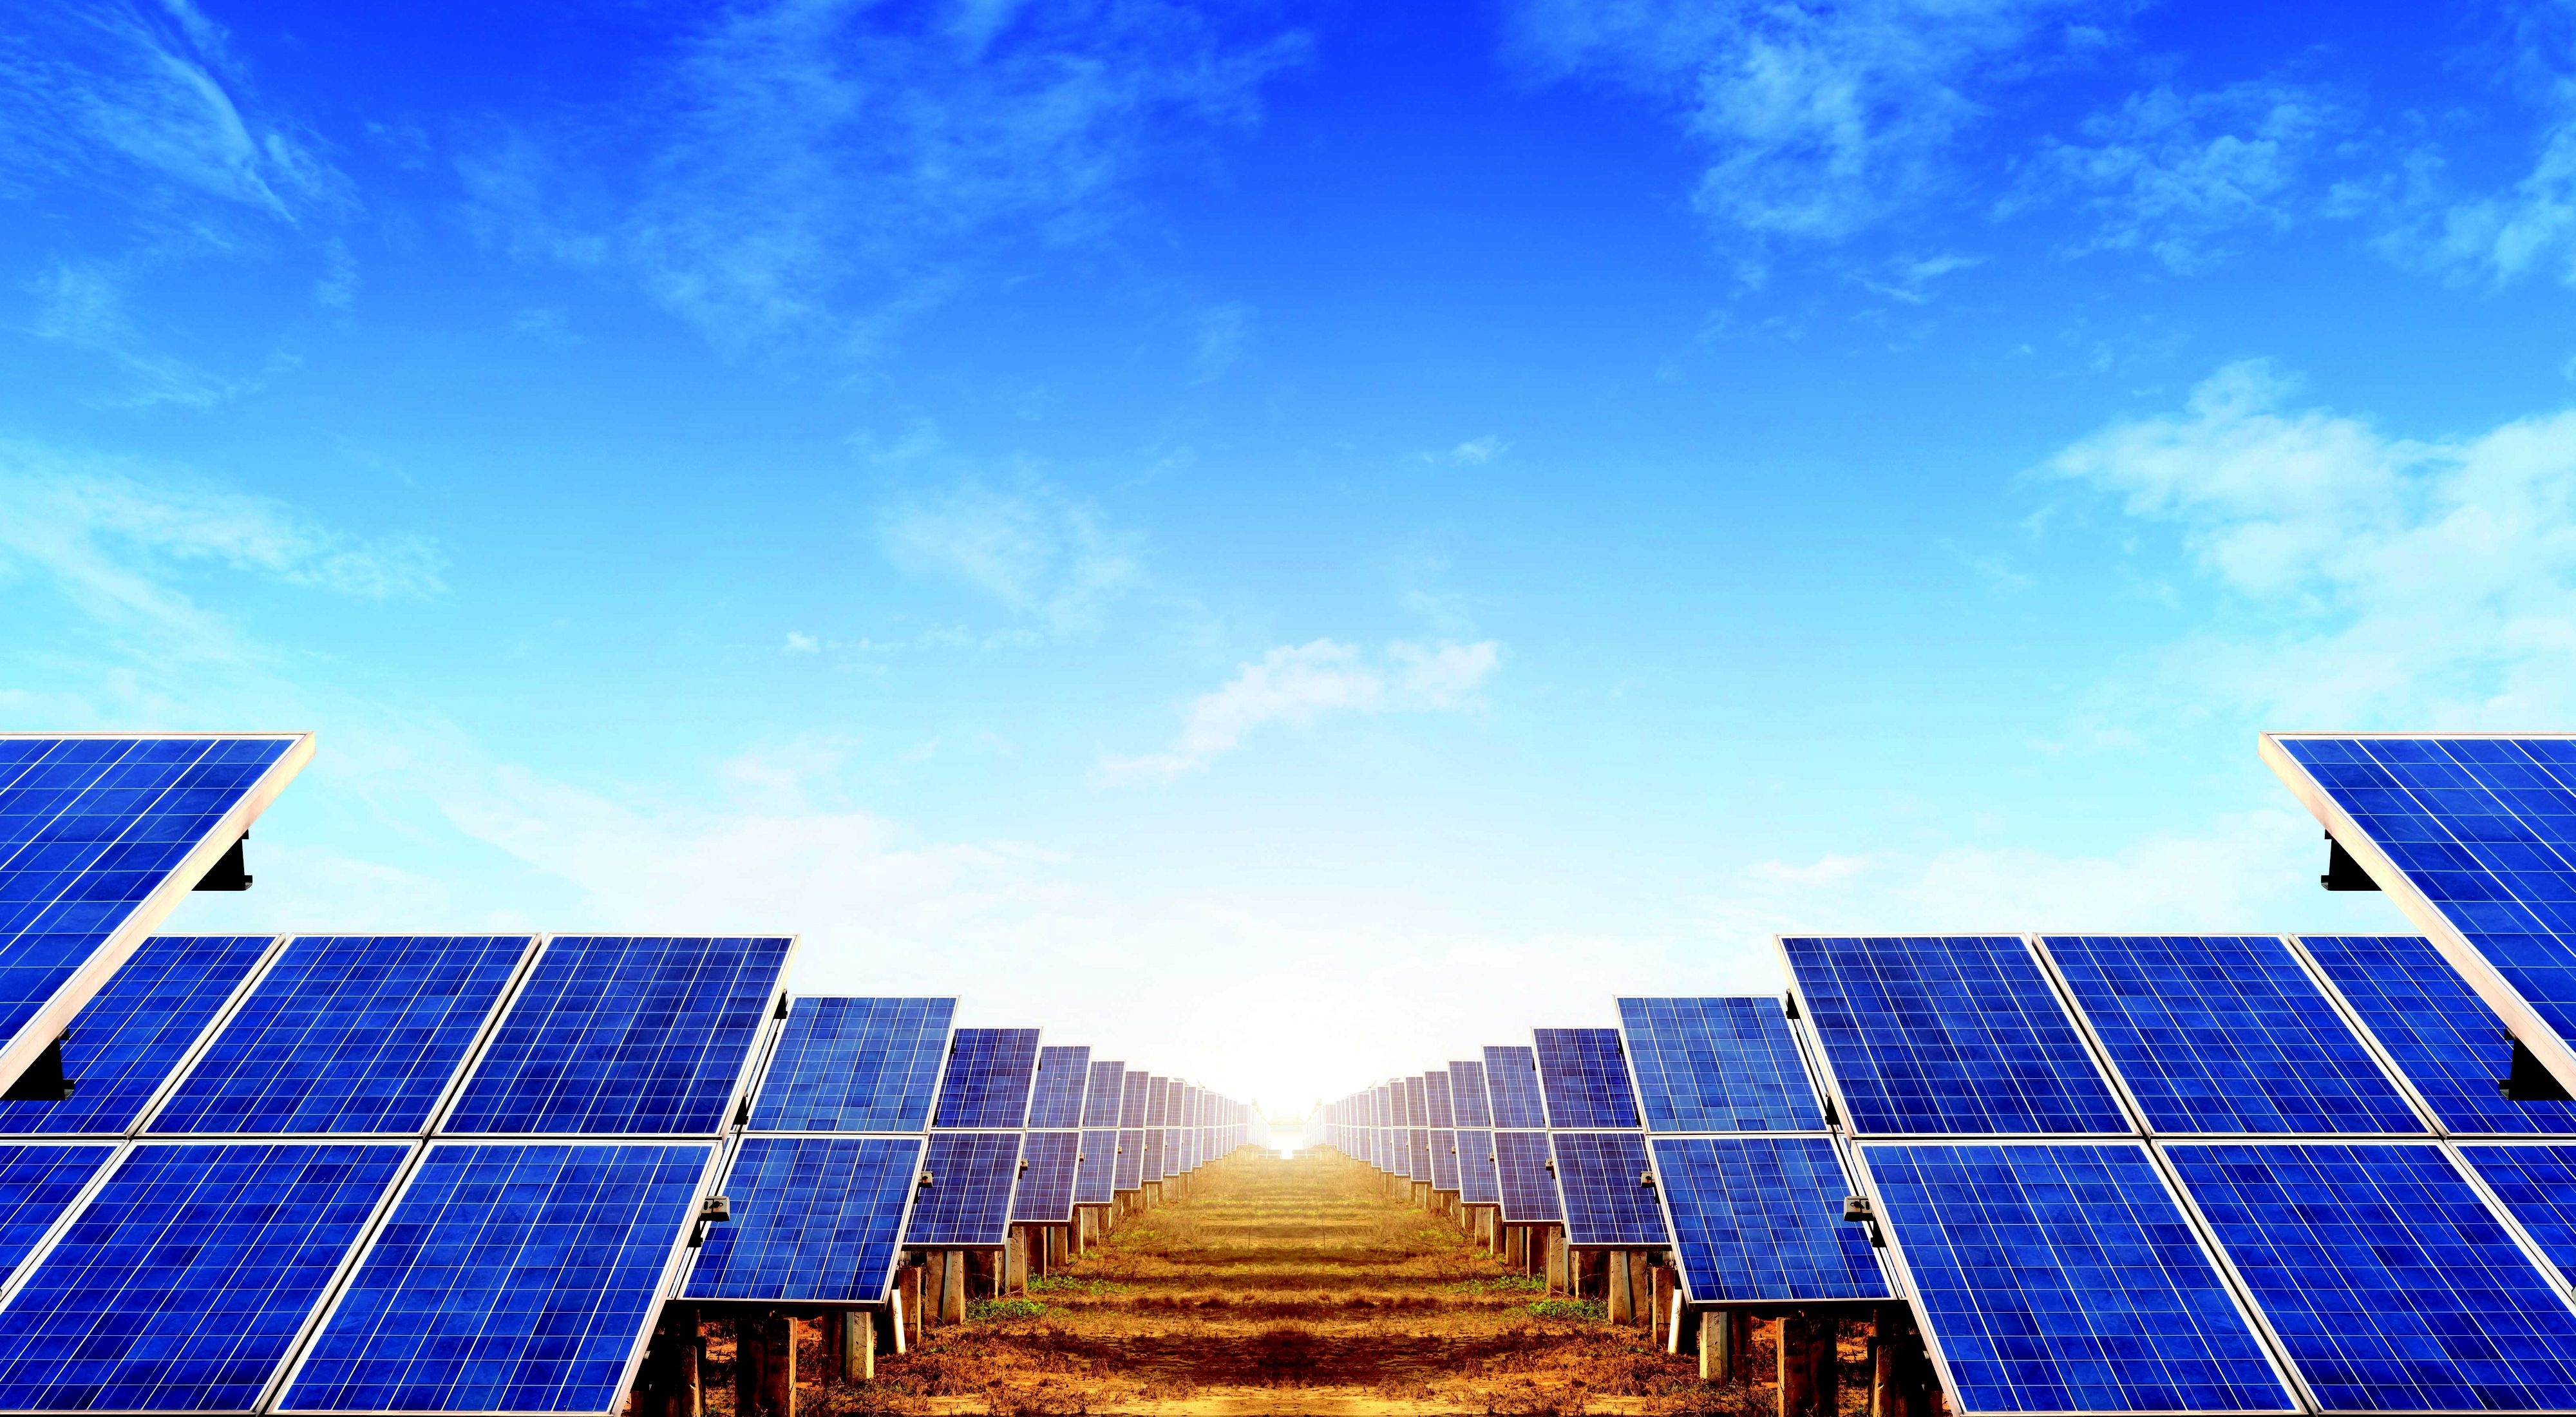 Solar power: A key part of the renewable energy transition.